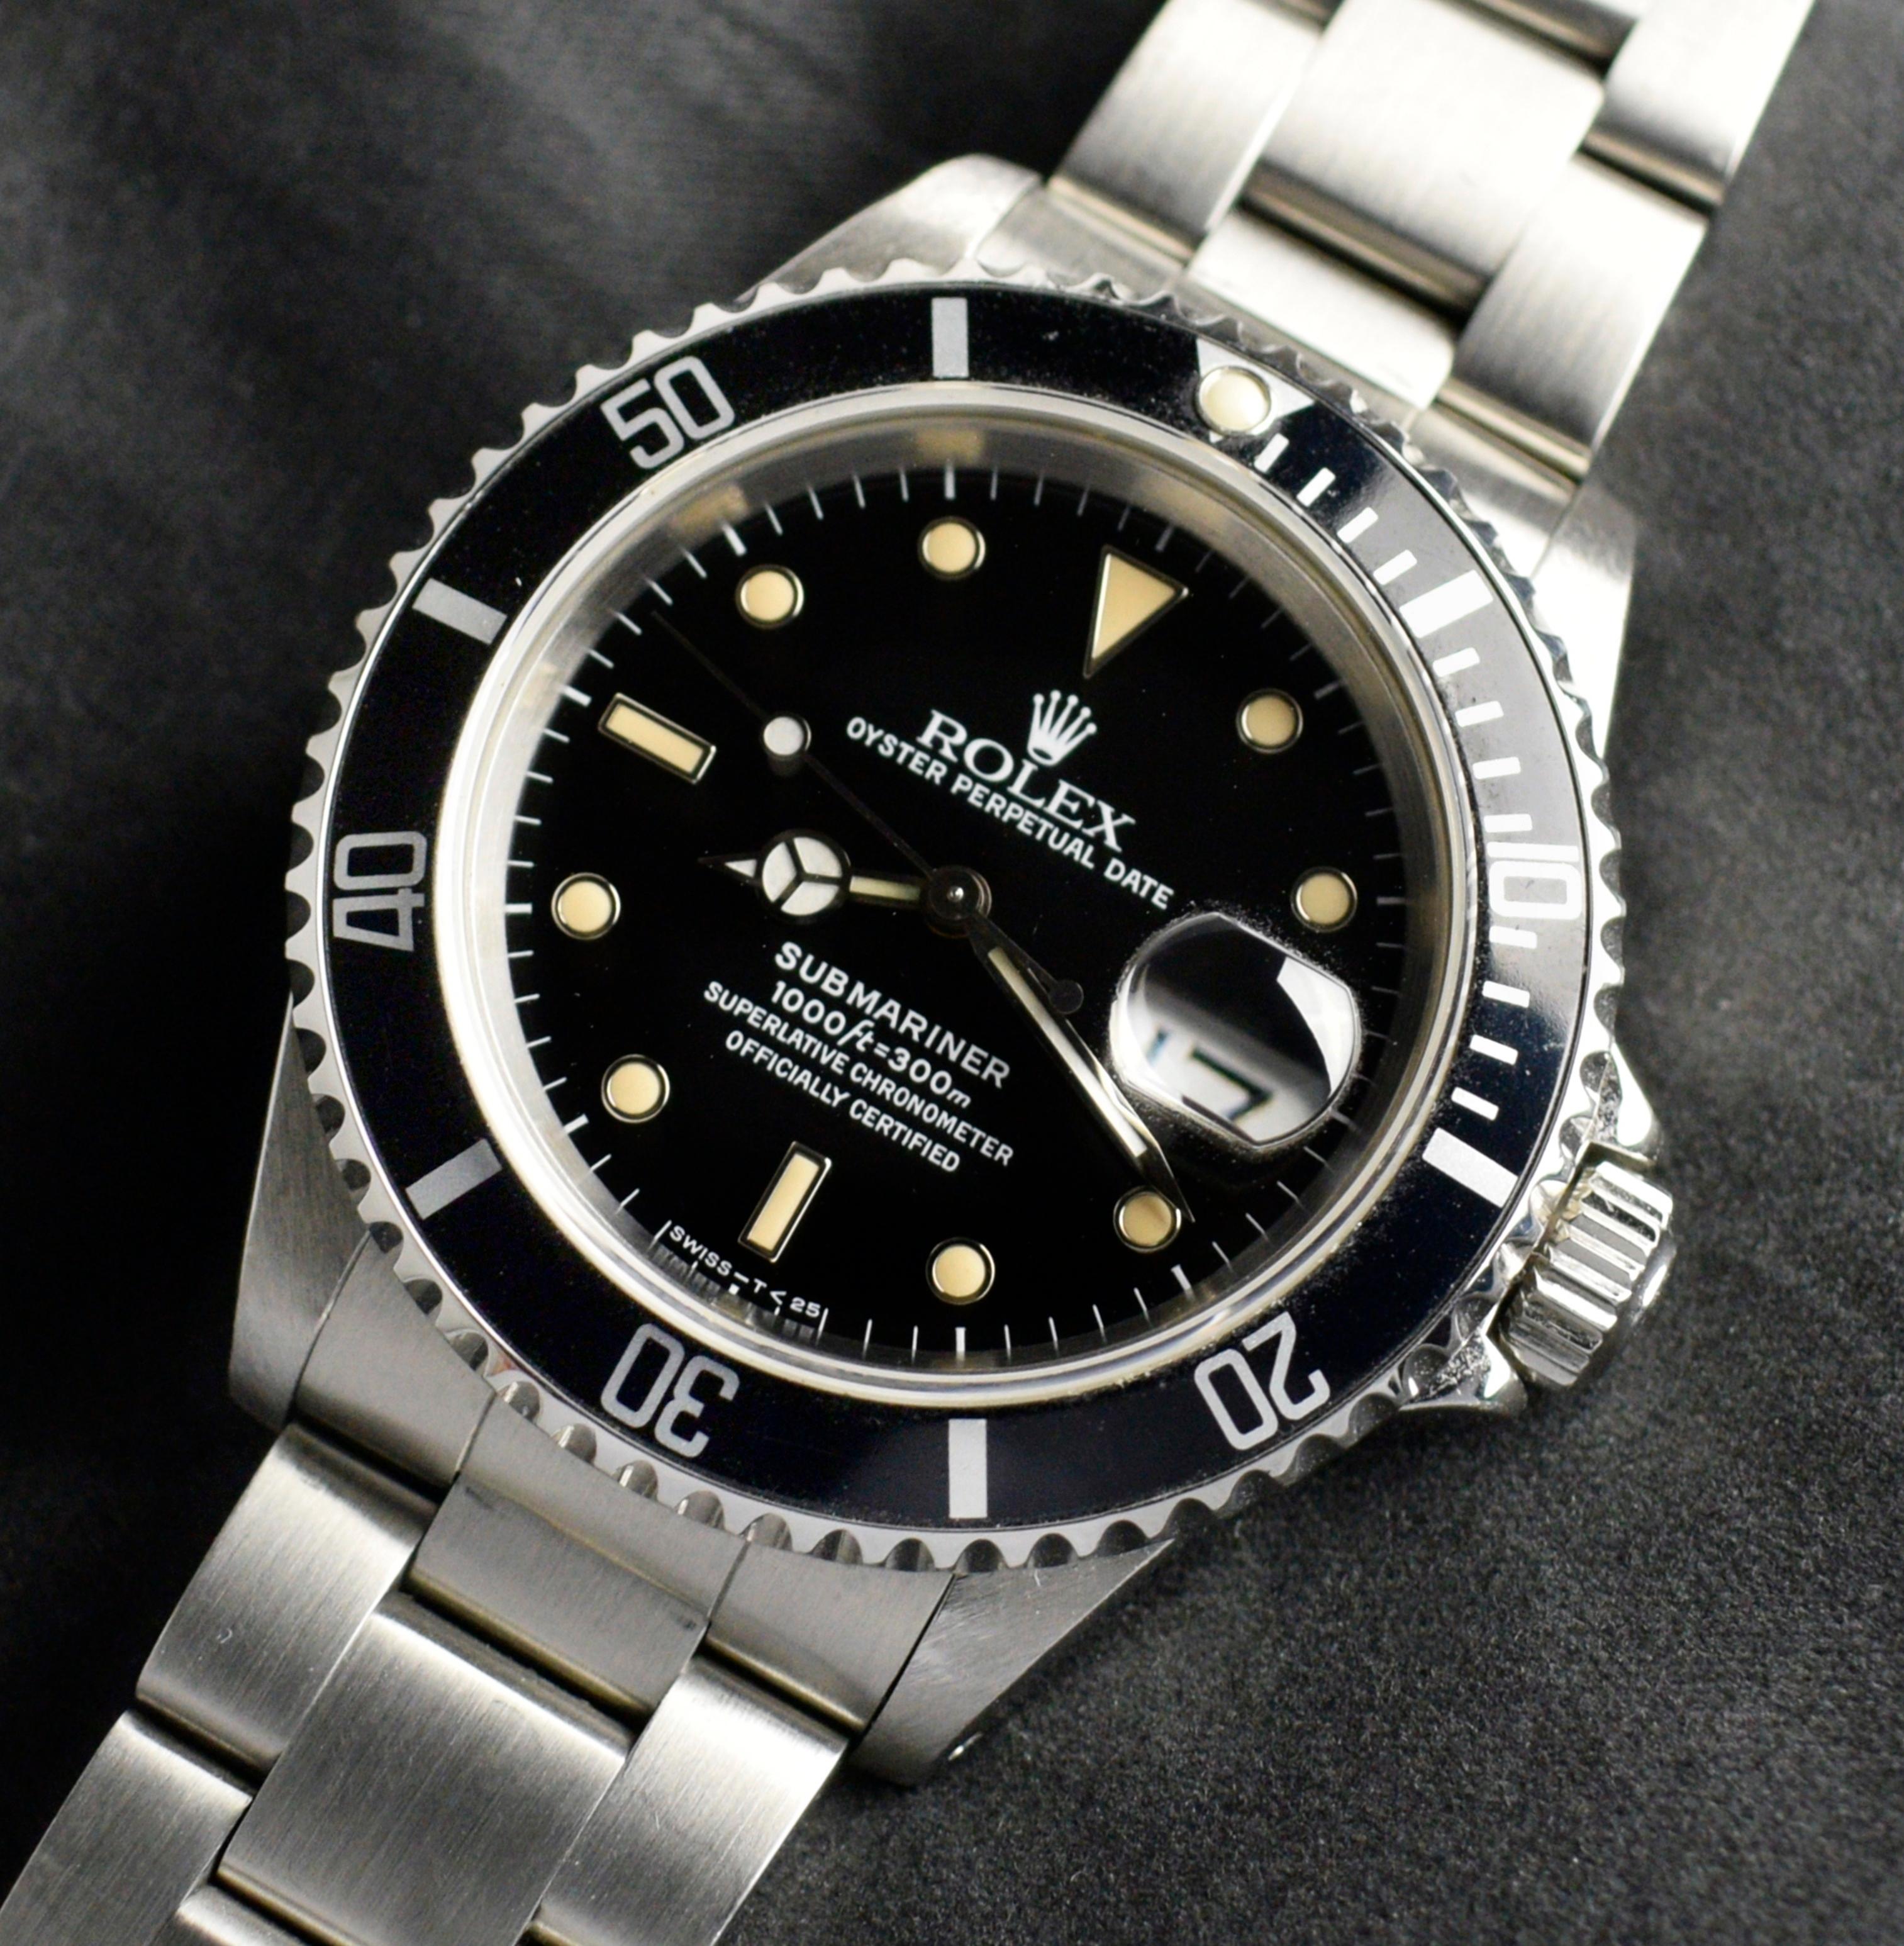 Brand: Rolex
Model: 16610
Year: 1990
Serial number: E8xxxxx
Reference: OT1573

Case: Show sign of wear w/ slight polish from previous ; inner case back stamped 16610

Dial: Excellent Condition Black Tritium Dial where the indexes have turned into